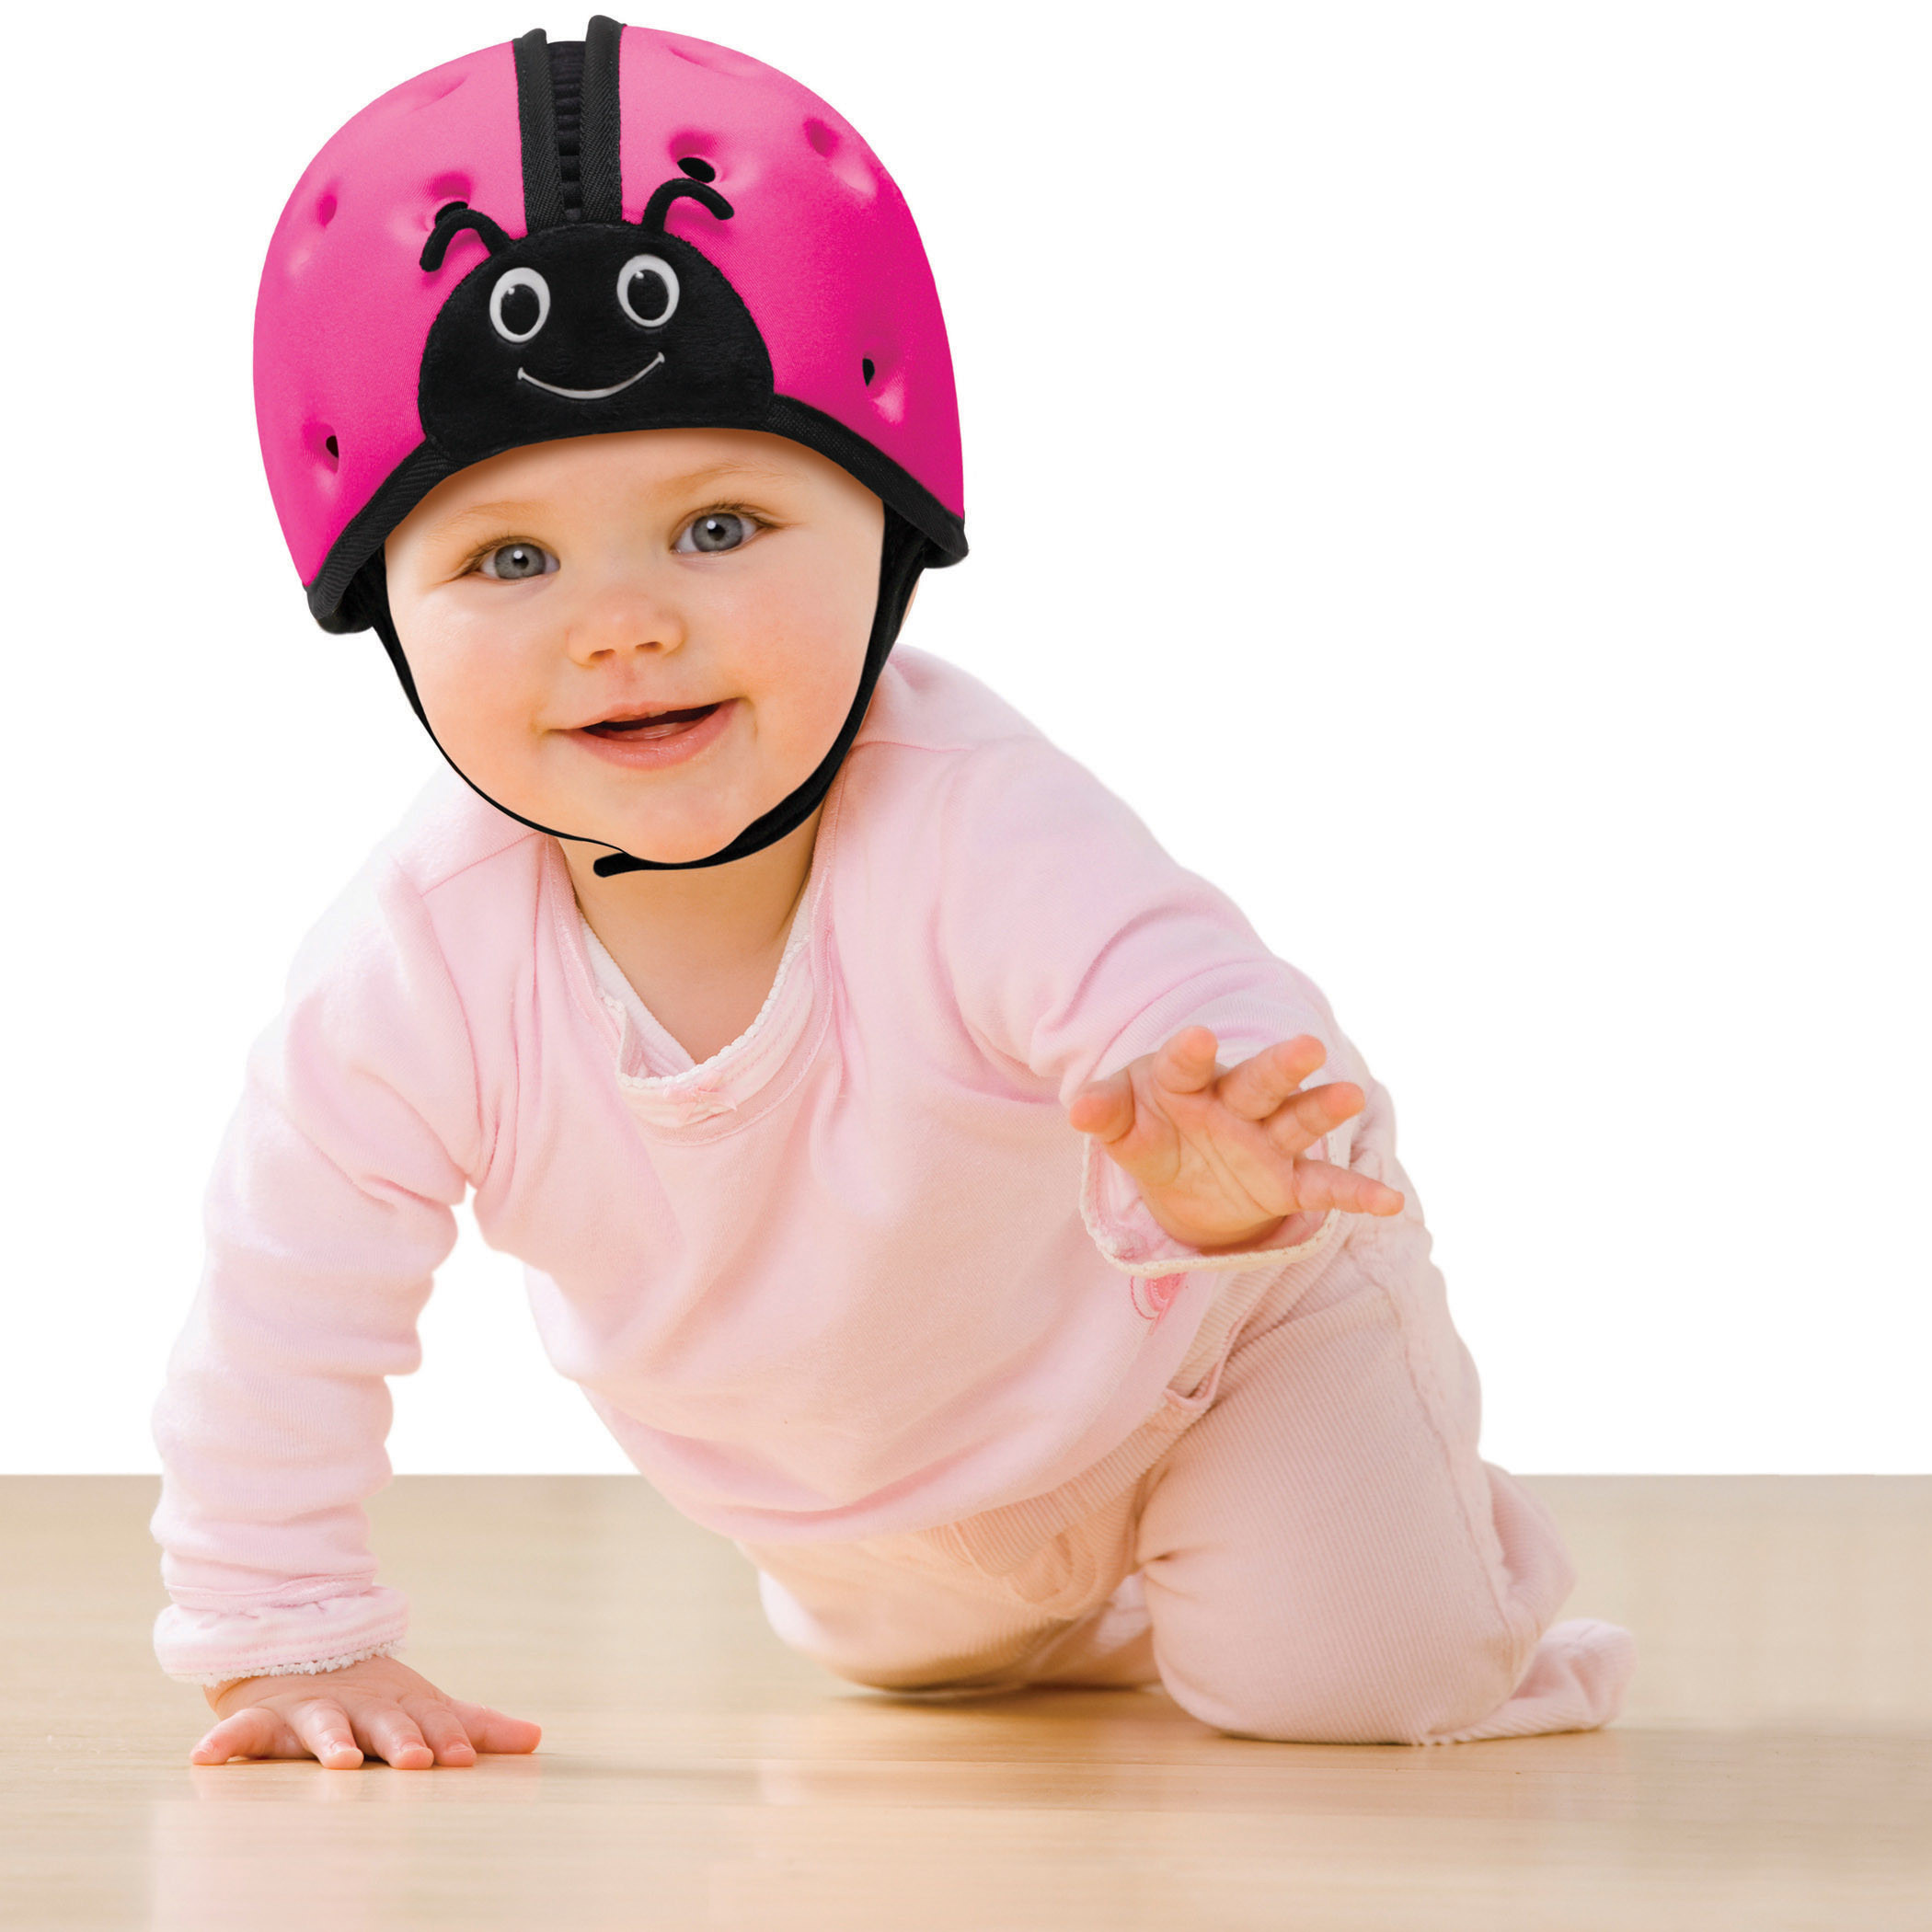 Baby Helmet for Crawling I Baby Head Protector 6-12 Months Toddler Helmets 1-2 Years Old Infant Baby Safety Headguard 